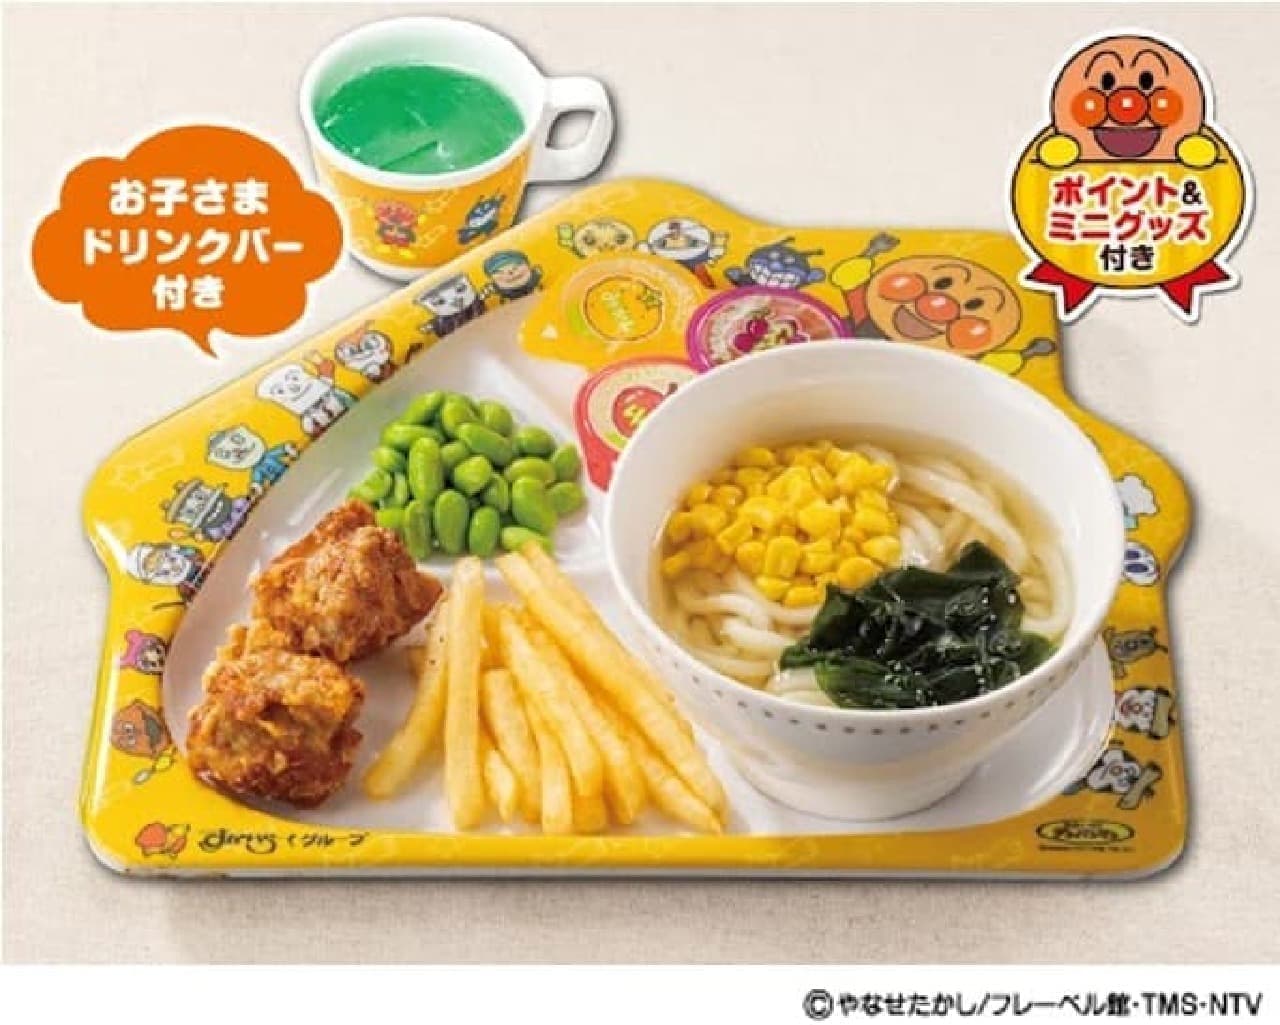 Gusto "Kids Udon Plate